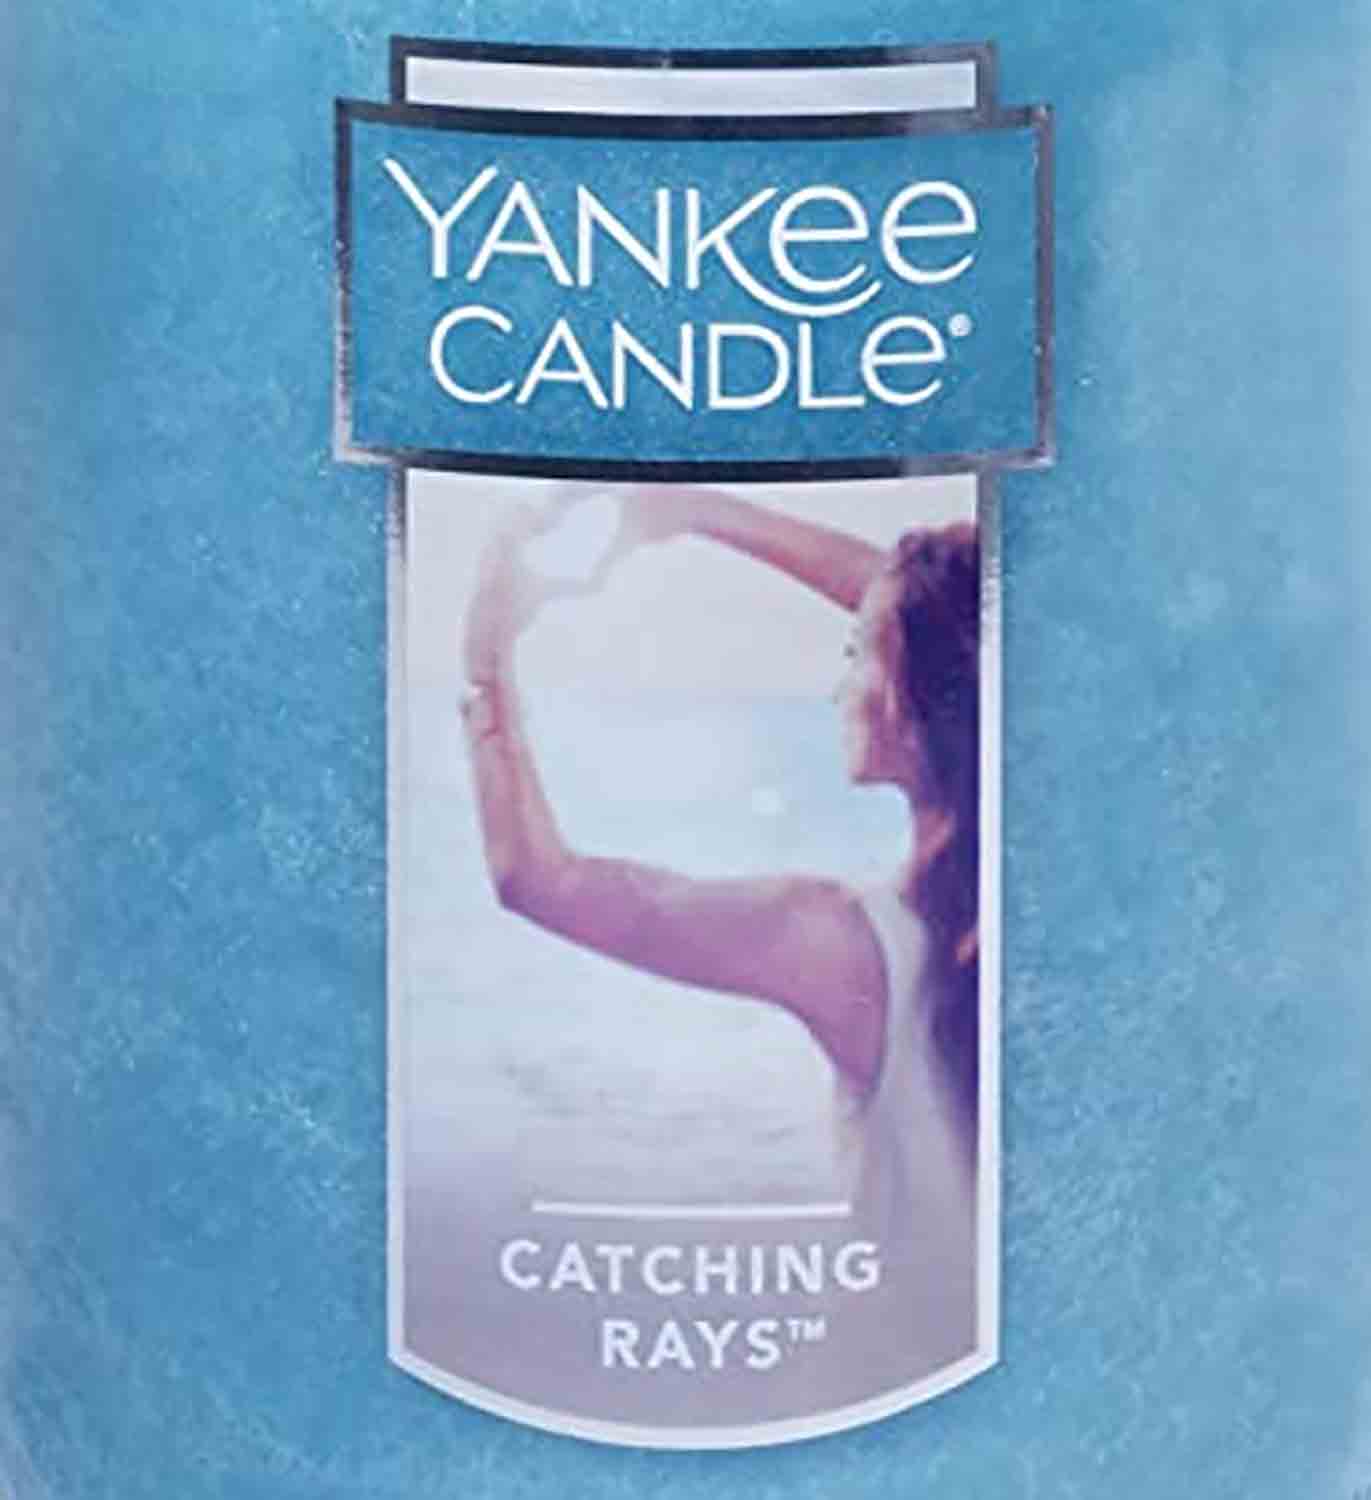 Yankee Candle Catching Rays 22g - Crumble vosk